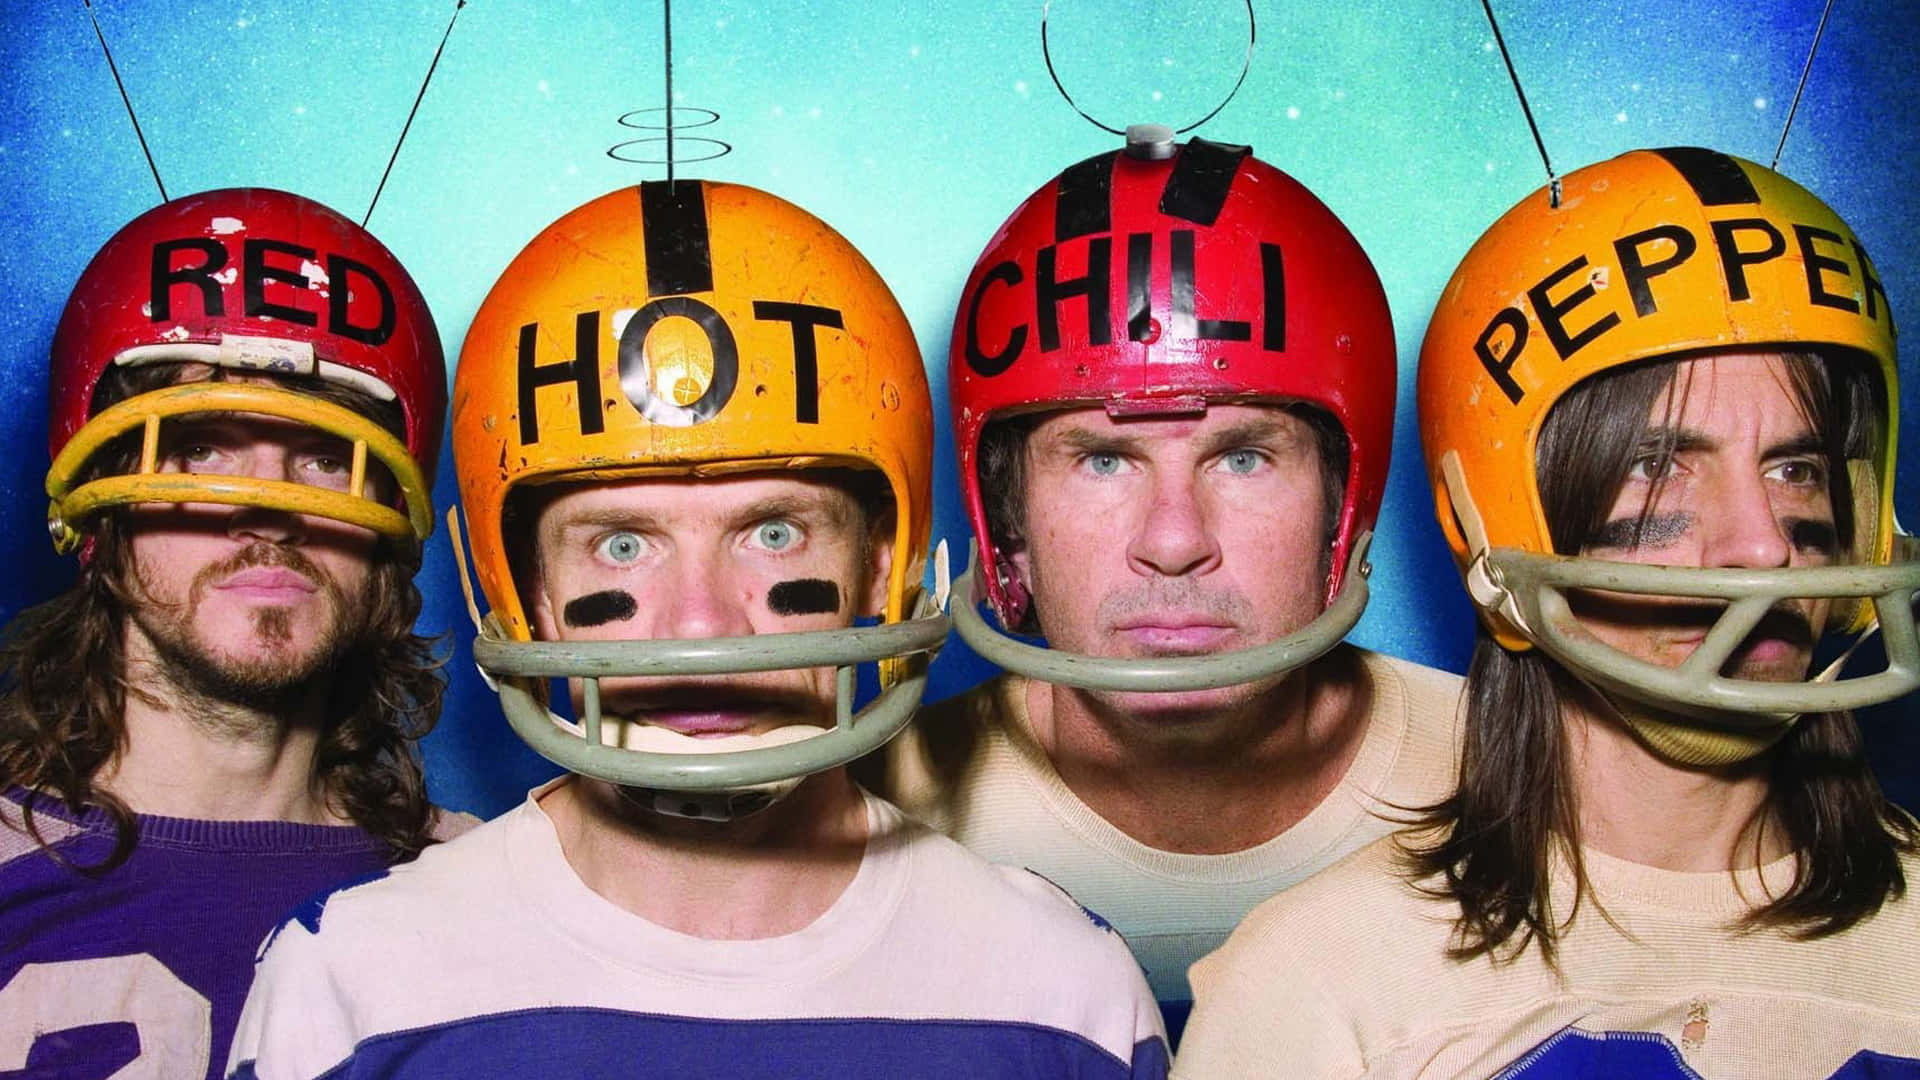 Four Men Wearing Helmets With Red, Hot, And Pepper Wallpaper